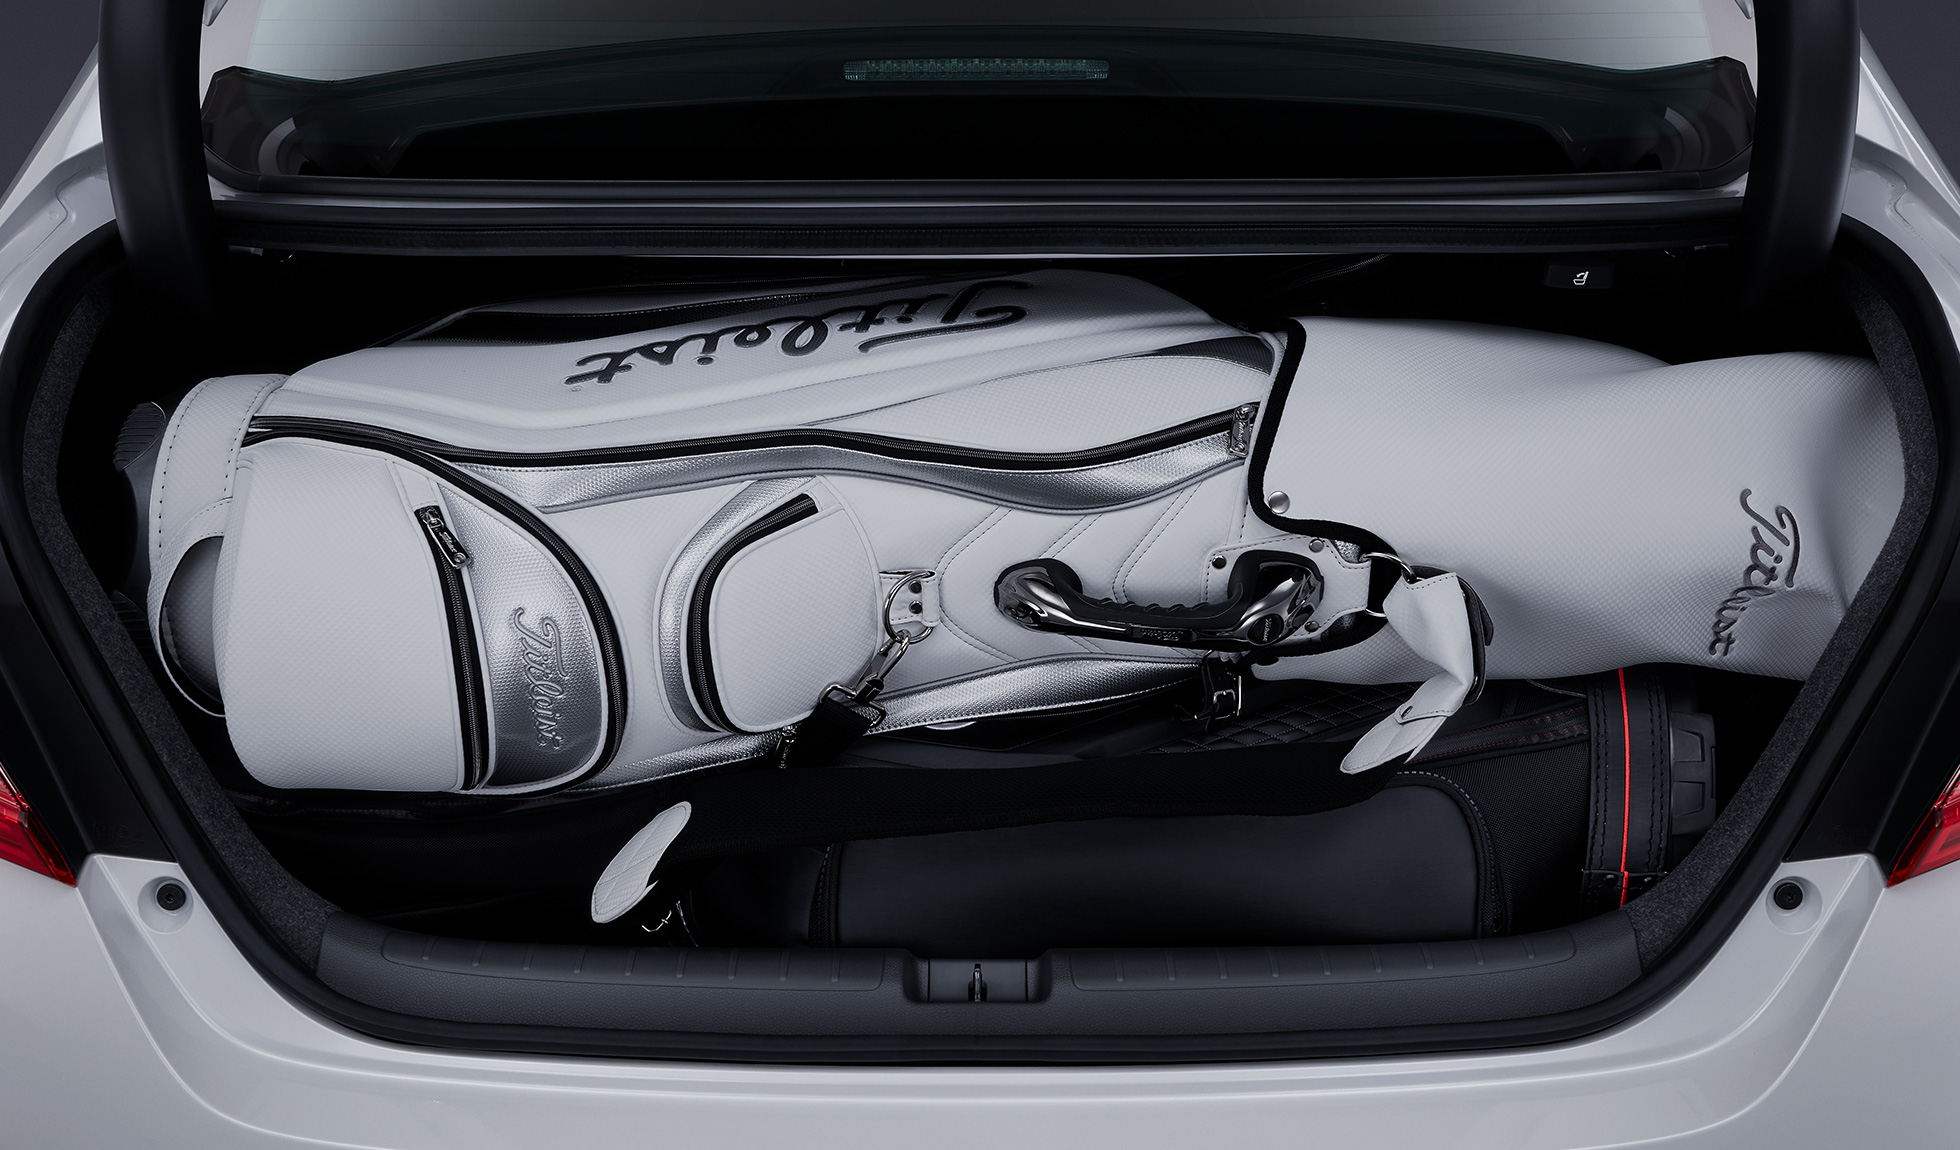 Honda Accord When four 9.5 inch golf bags are loaded